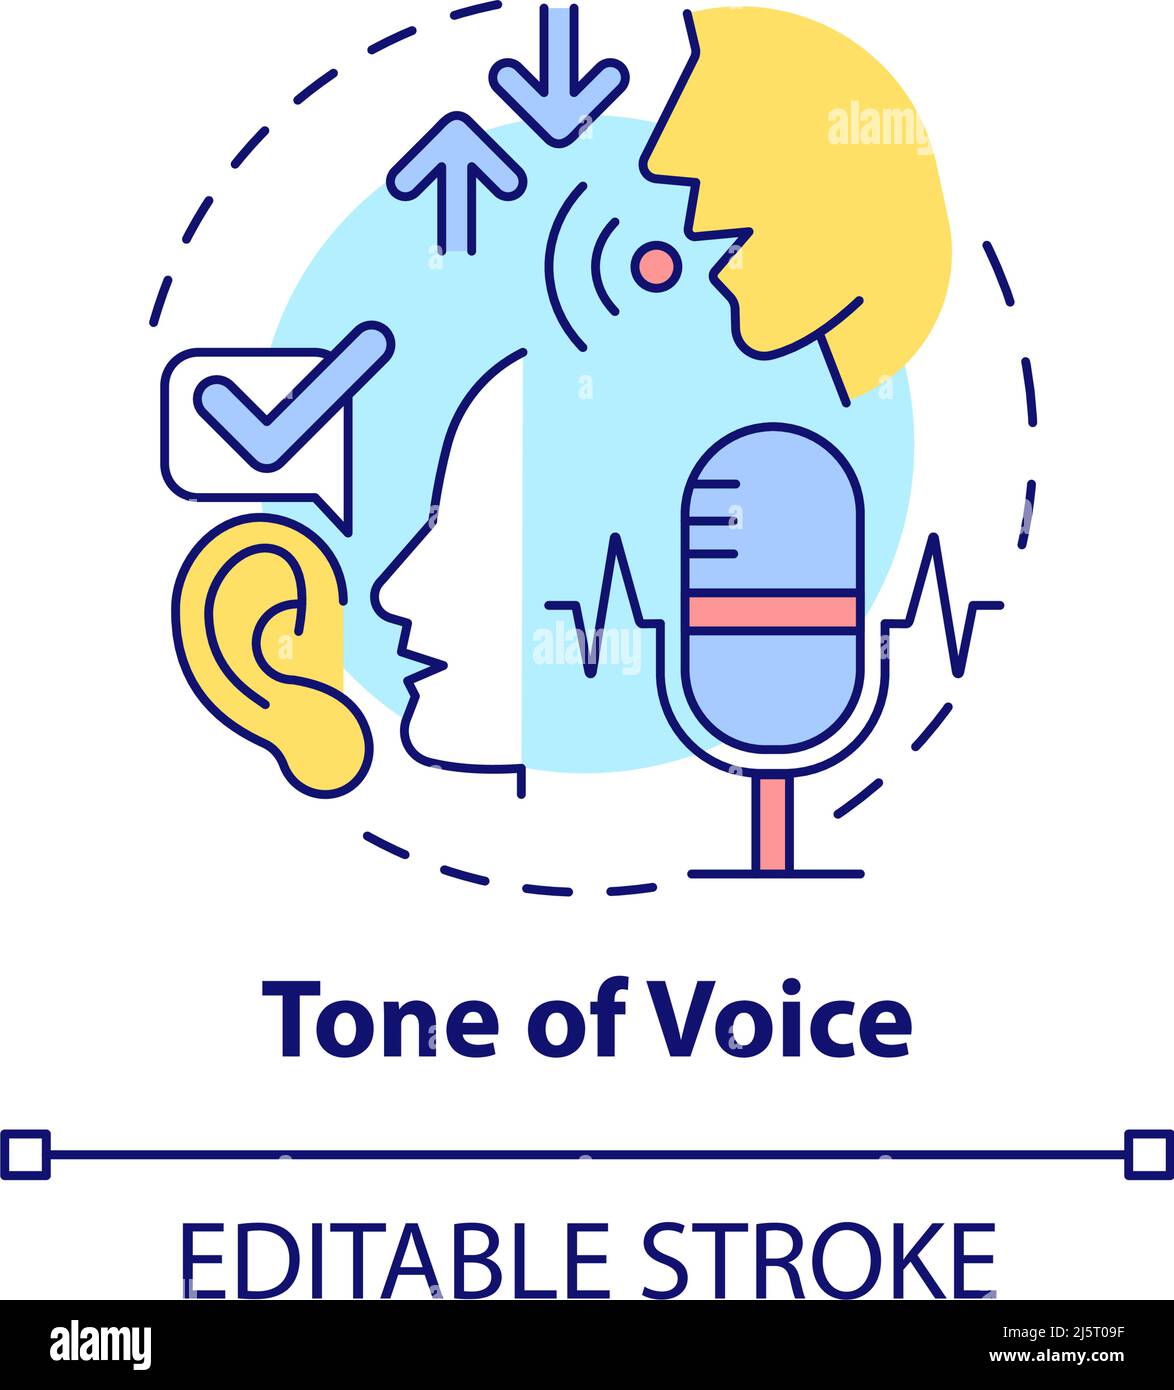 Tone of voice hi-res stock - Page 2 - Alamy